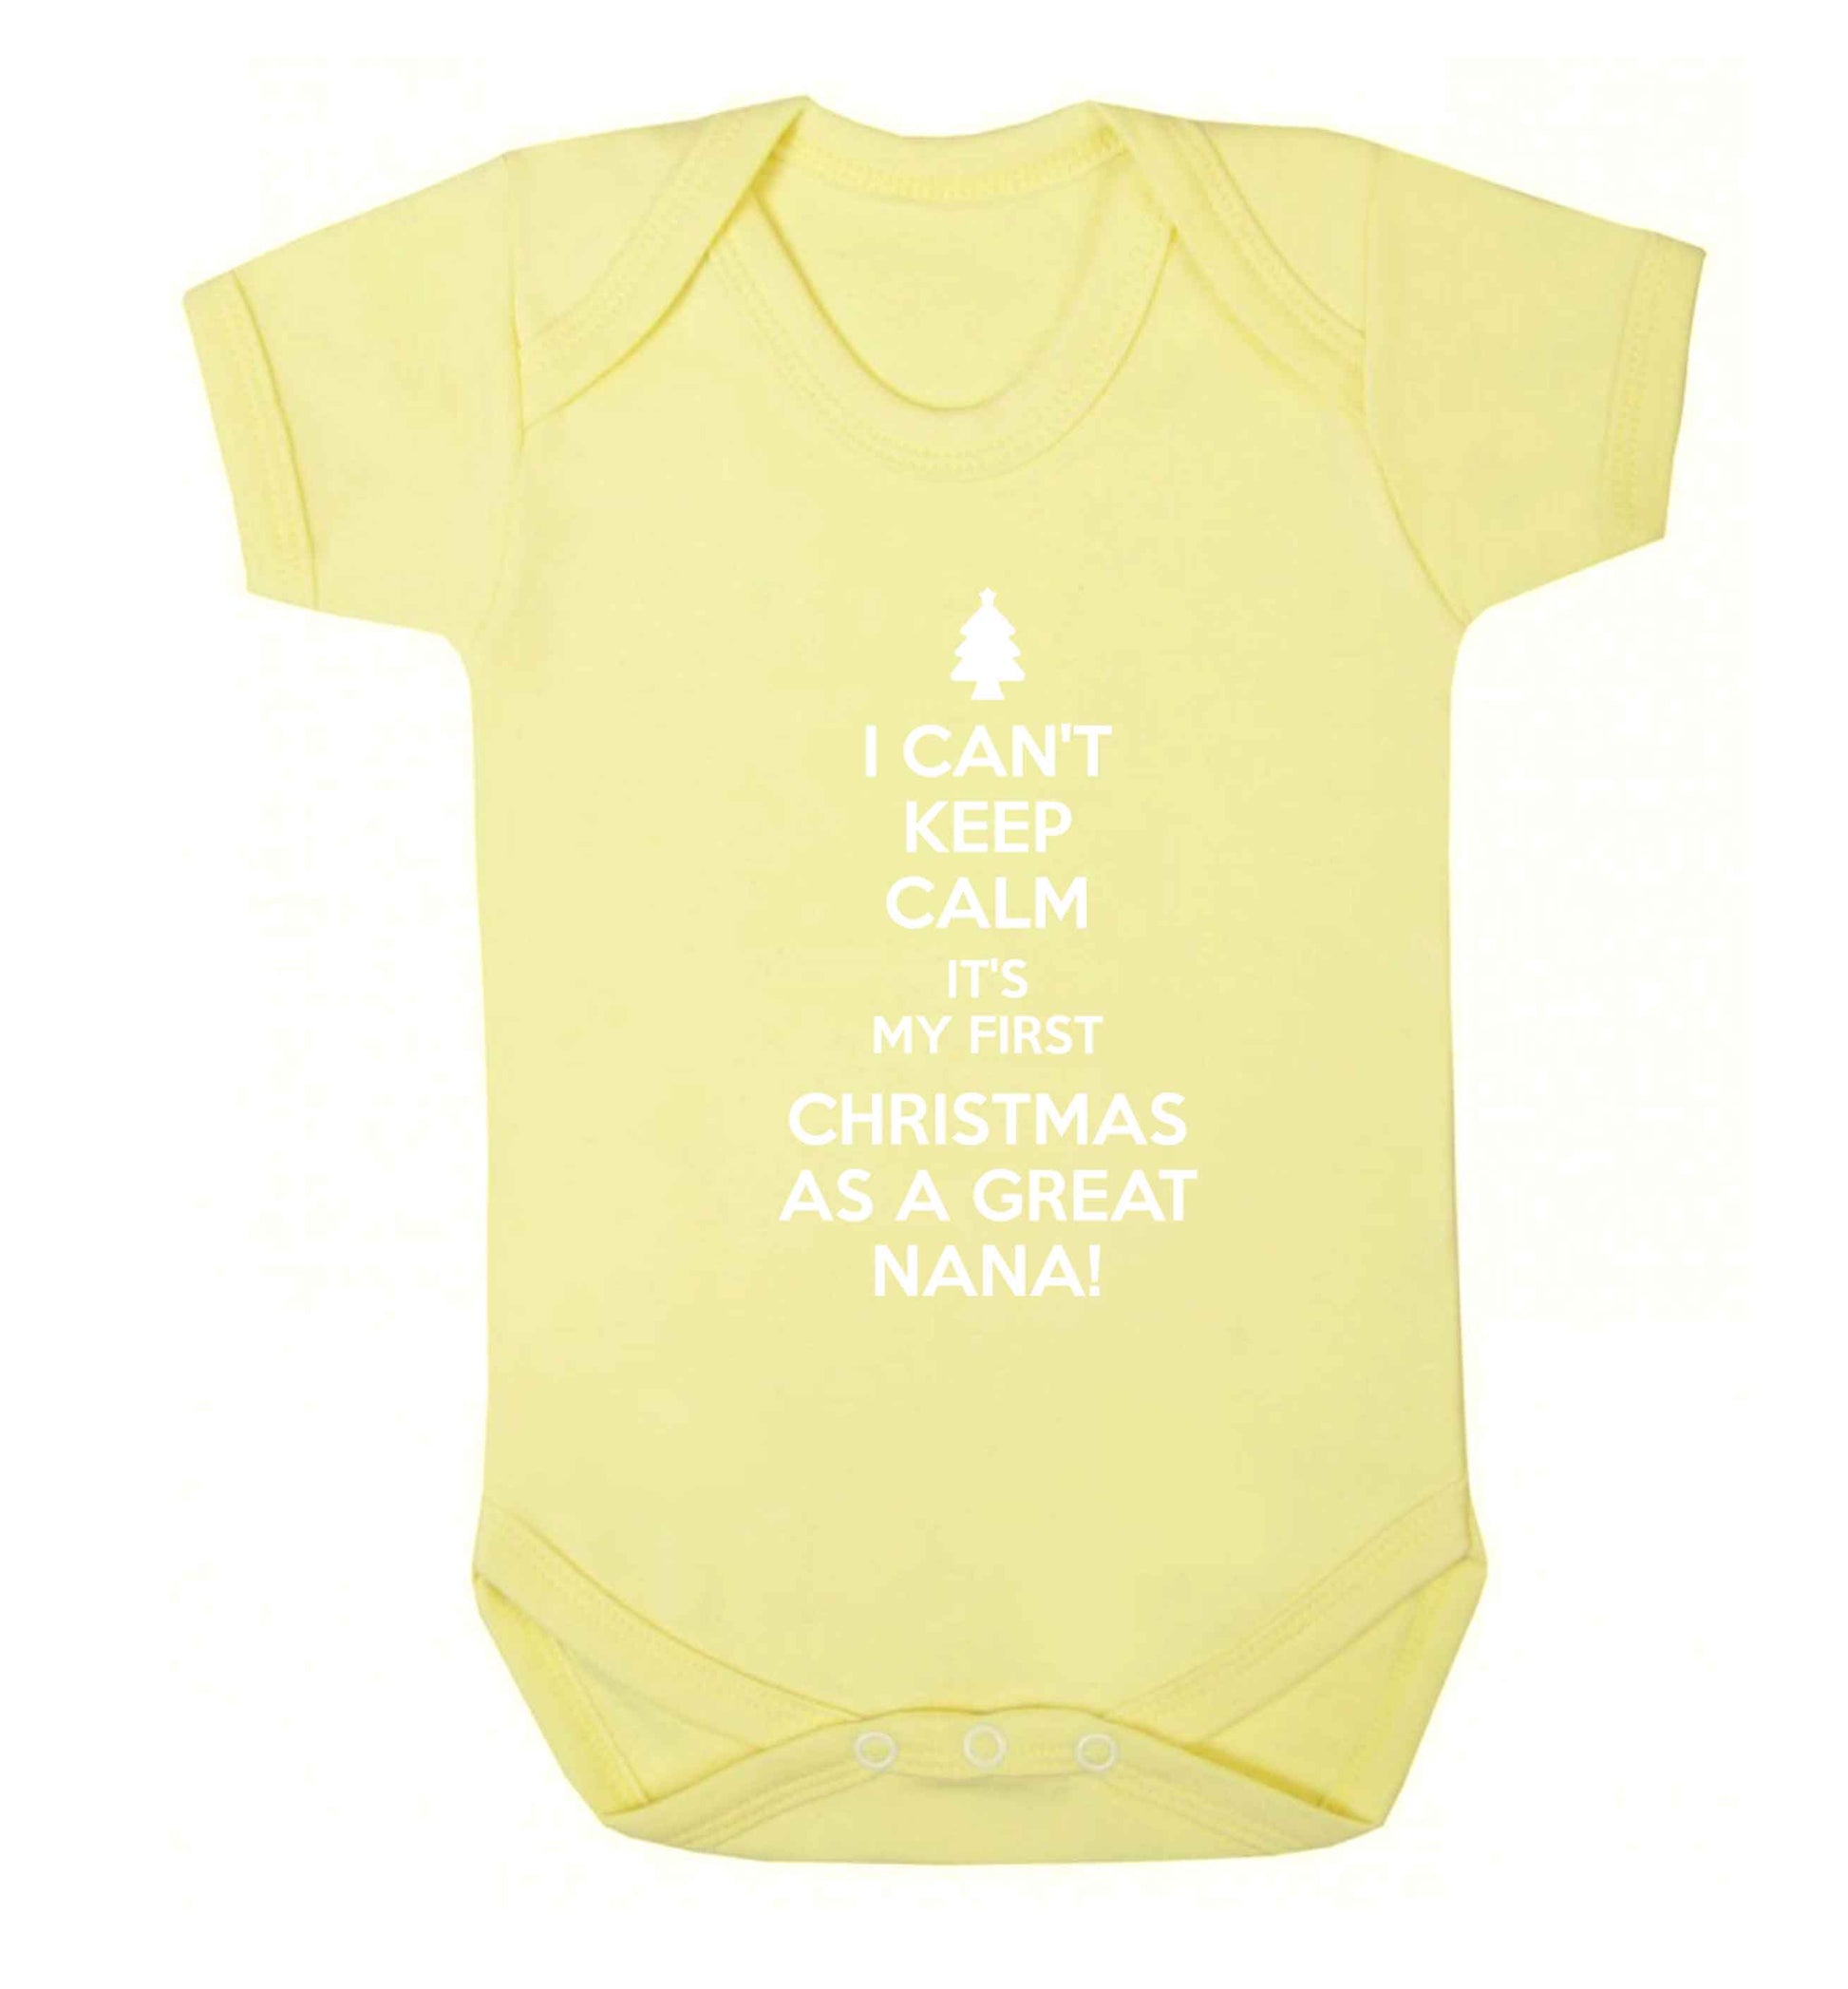 I can't keep calm it's my first Christmas as a great nana! Baby Vest pale yellow 18-24 months